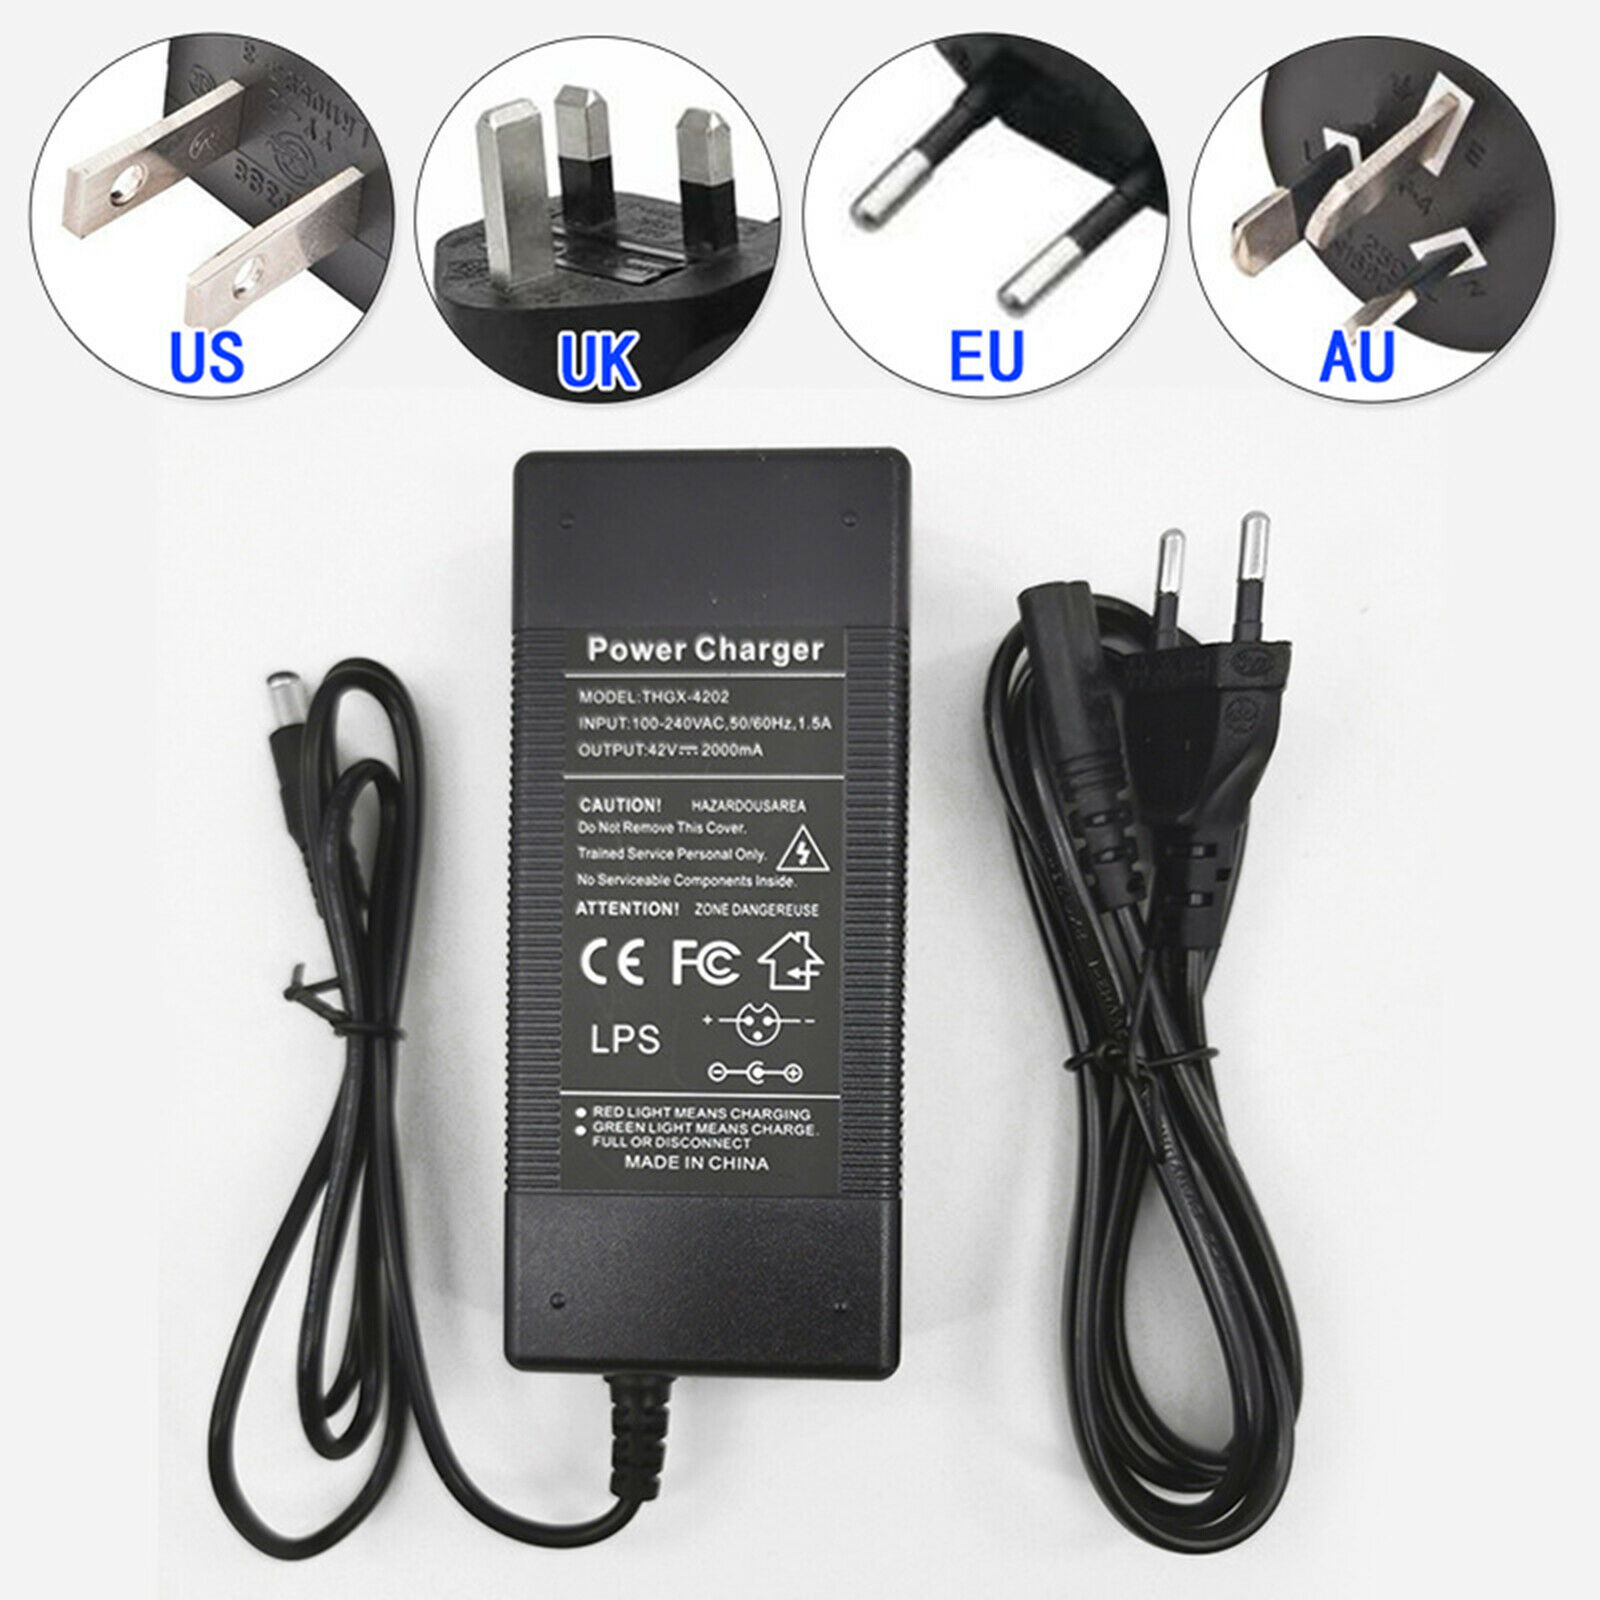 Scooter Charger ac adapter Power Supply Charging Plug for 8 inch Electric Scooter VER Mi Ninebot Scooter KUGOO Balance